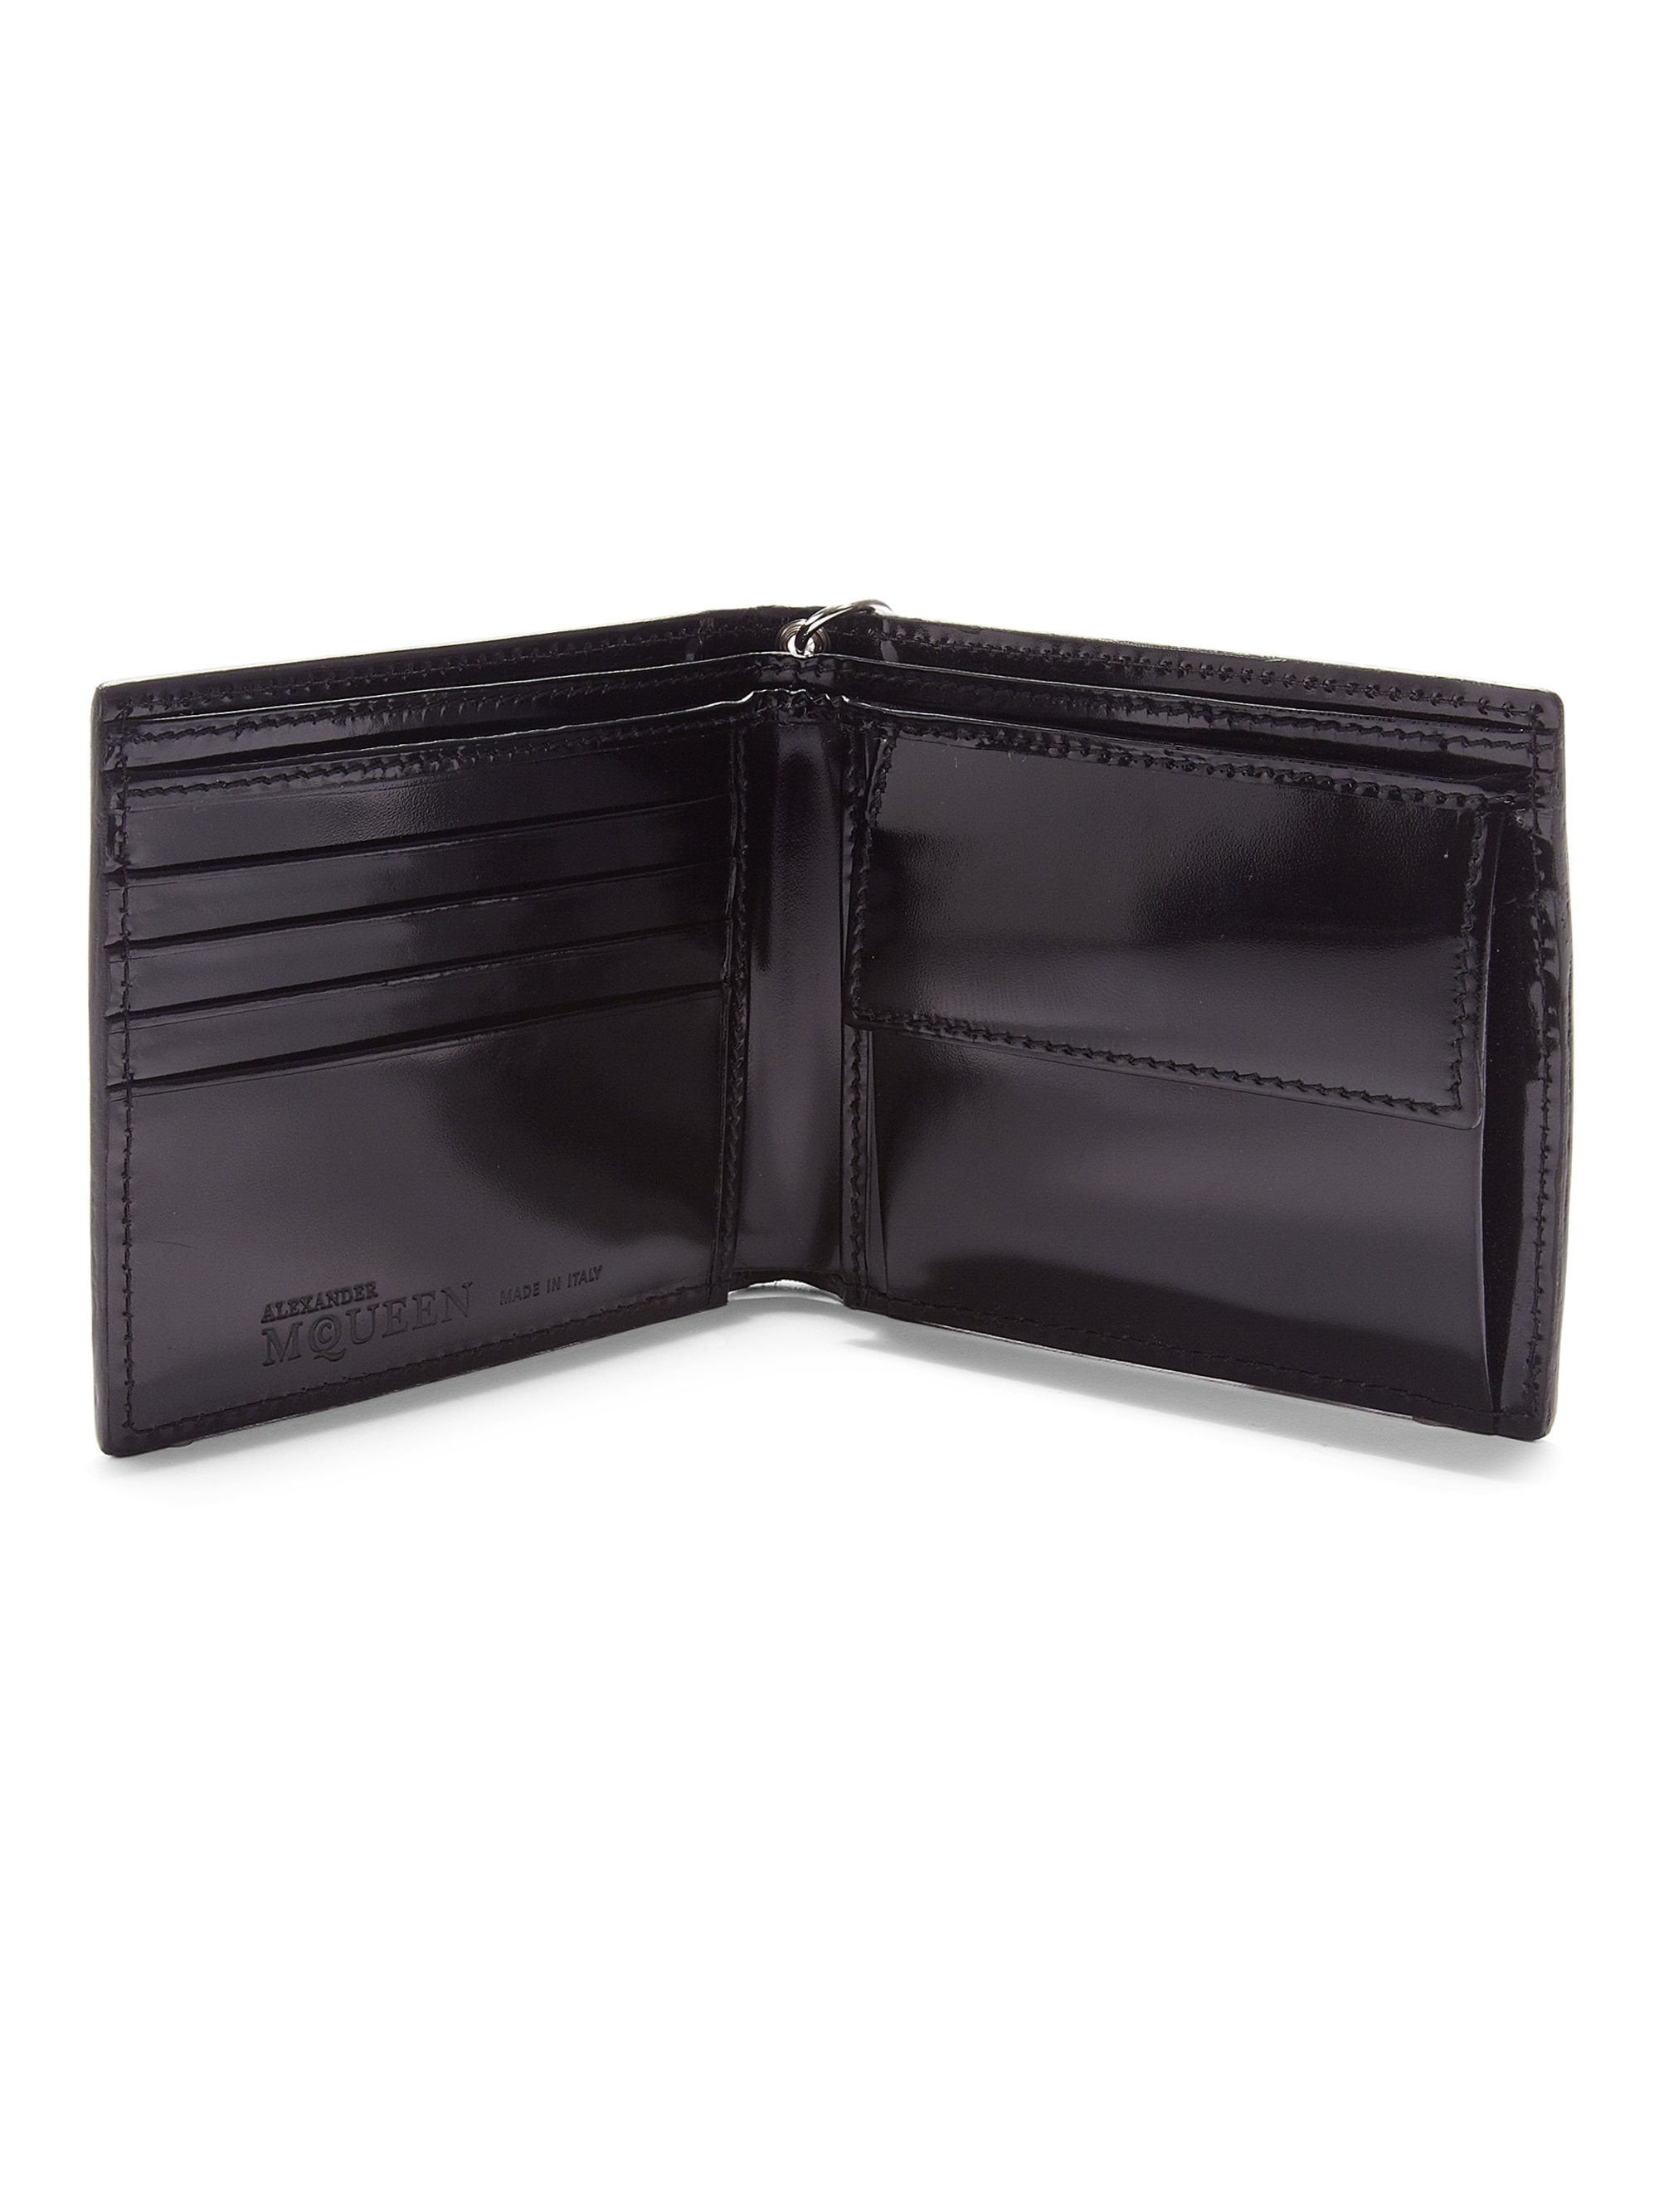 Lyst - Alexander Mcqueen Printed Leather Chain Wallet in Black for Men